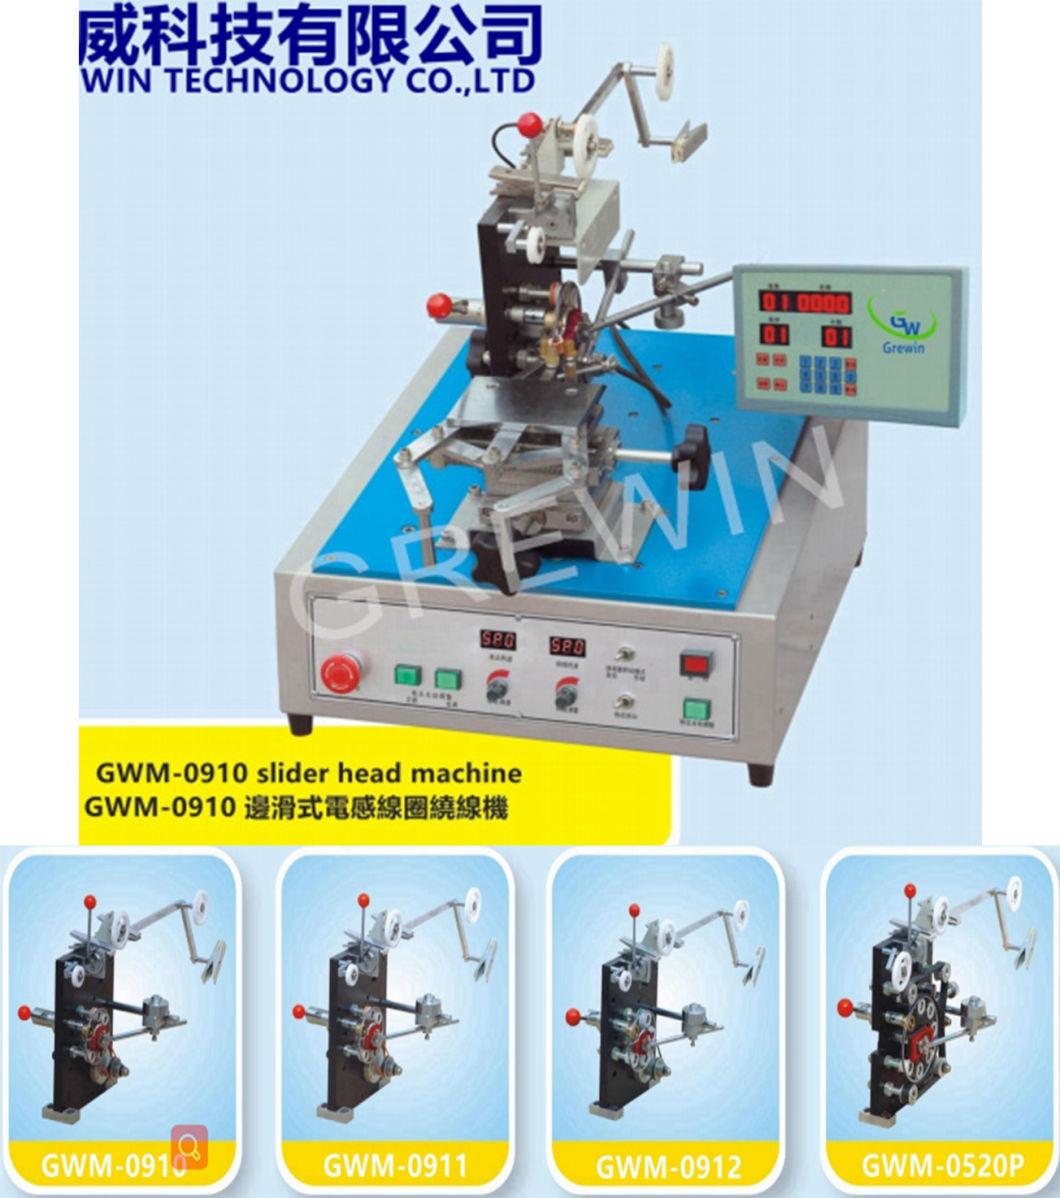 Precision Wire Winding Coil Inductor Toroid Coil Common Core Winding Machine